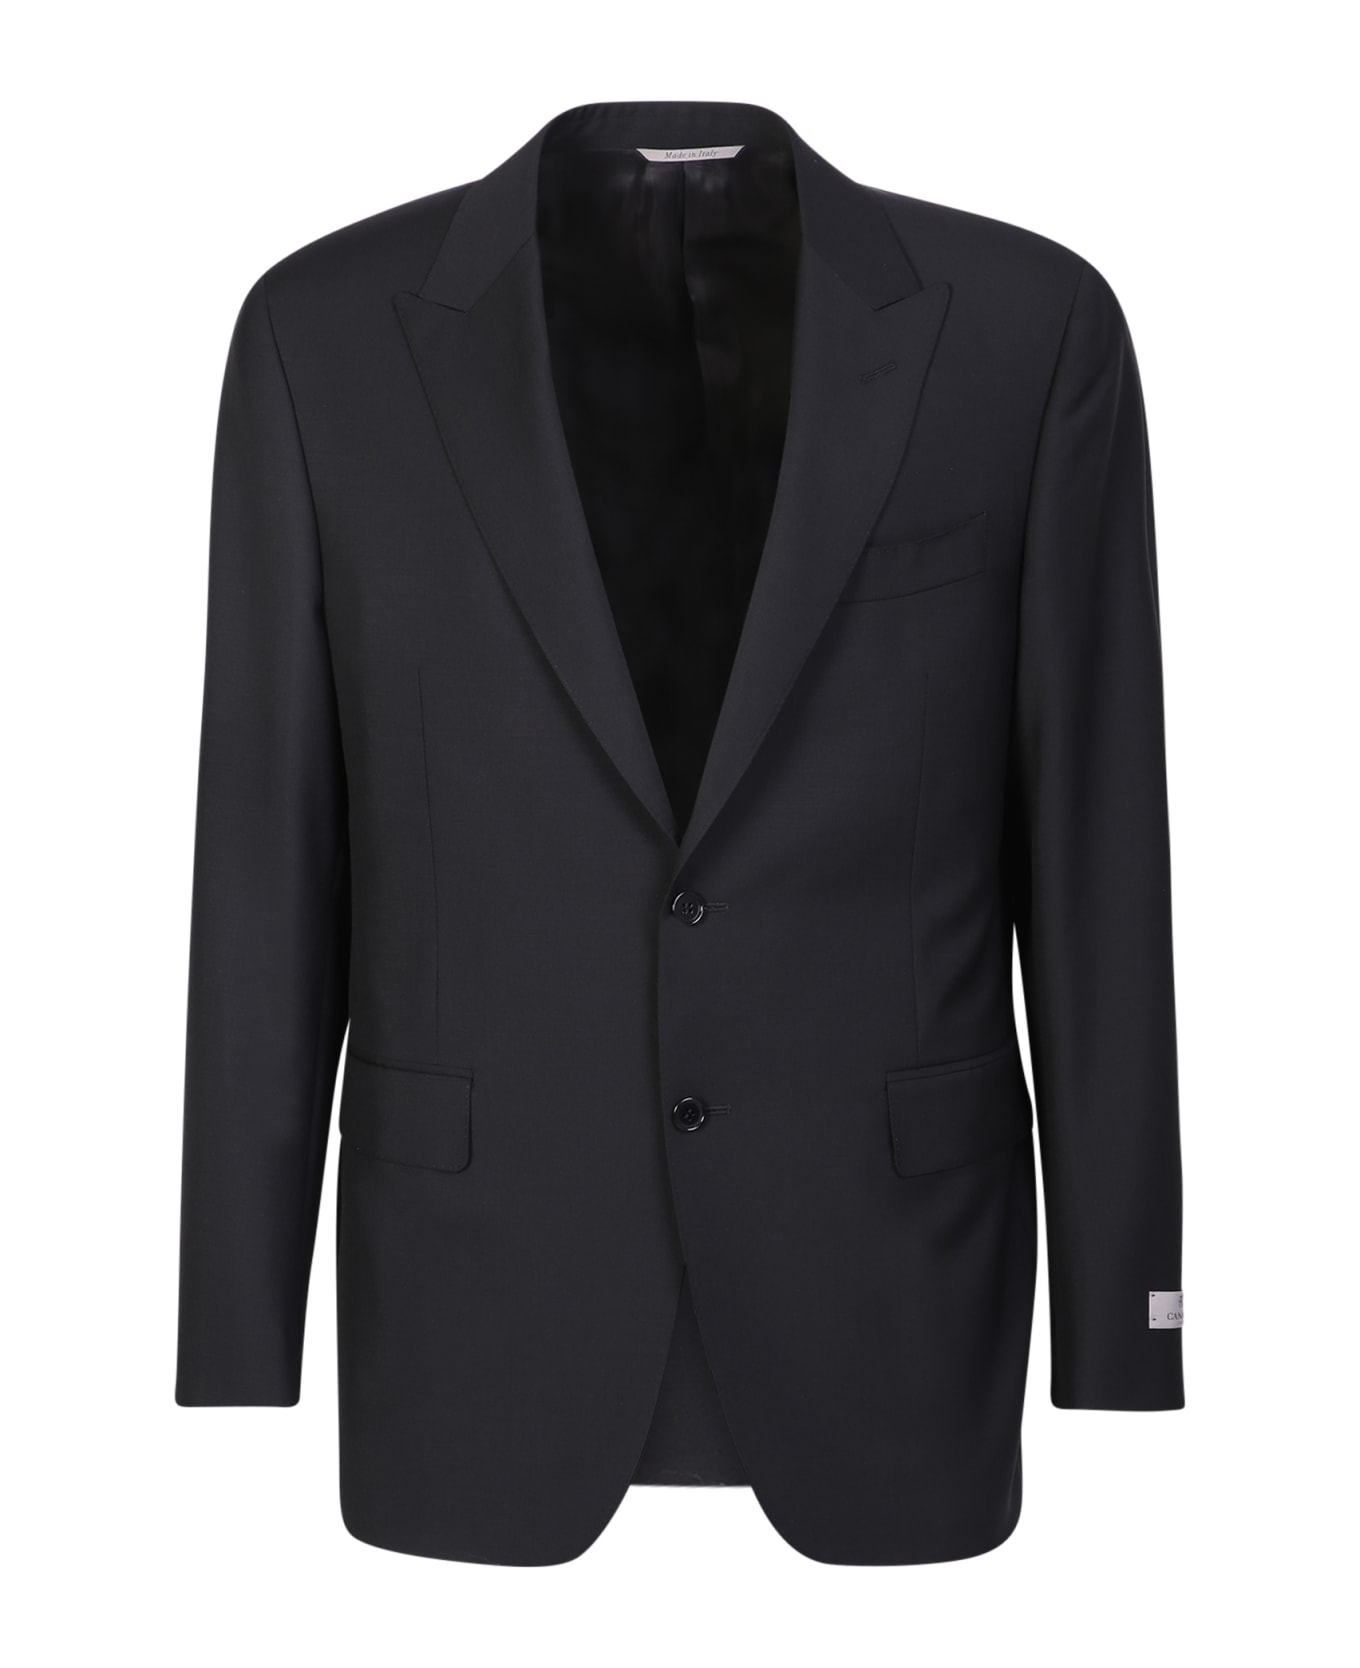 Canali Black Single-breasted Suit - Black